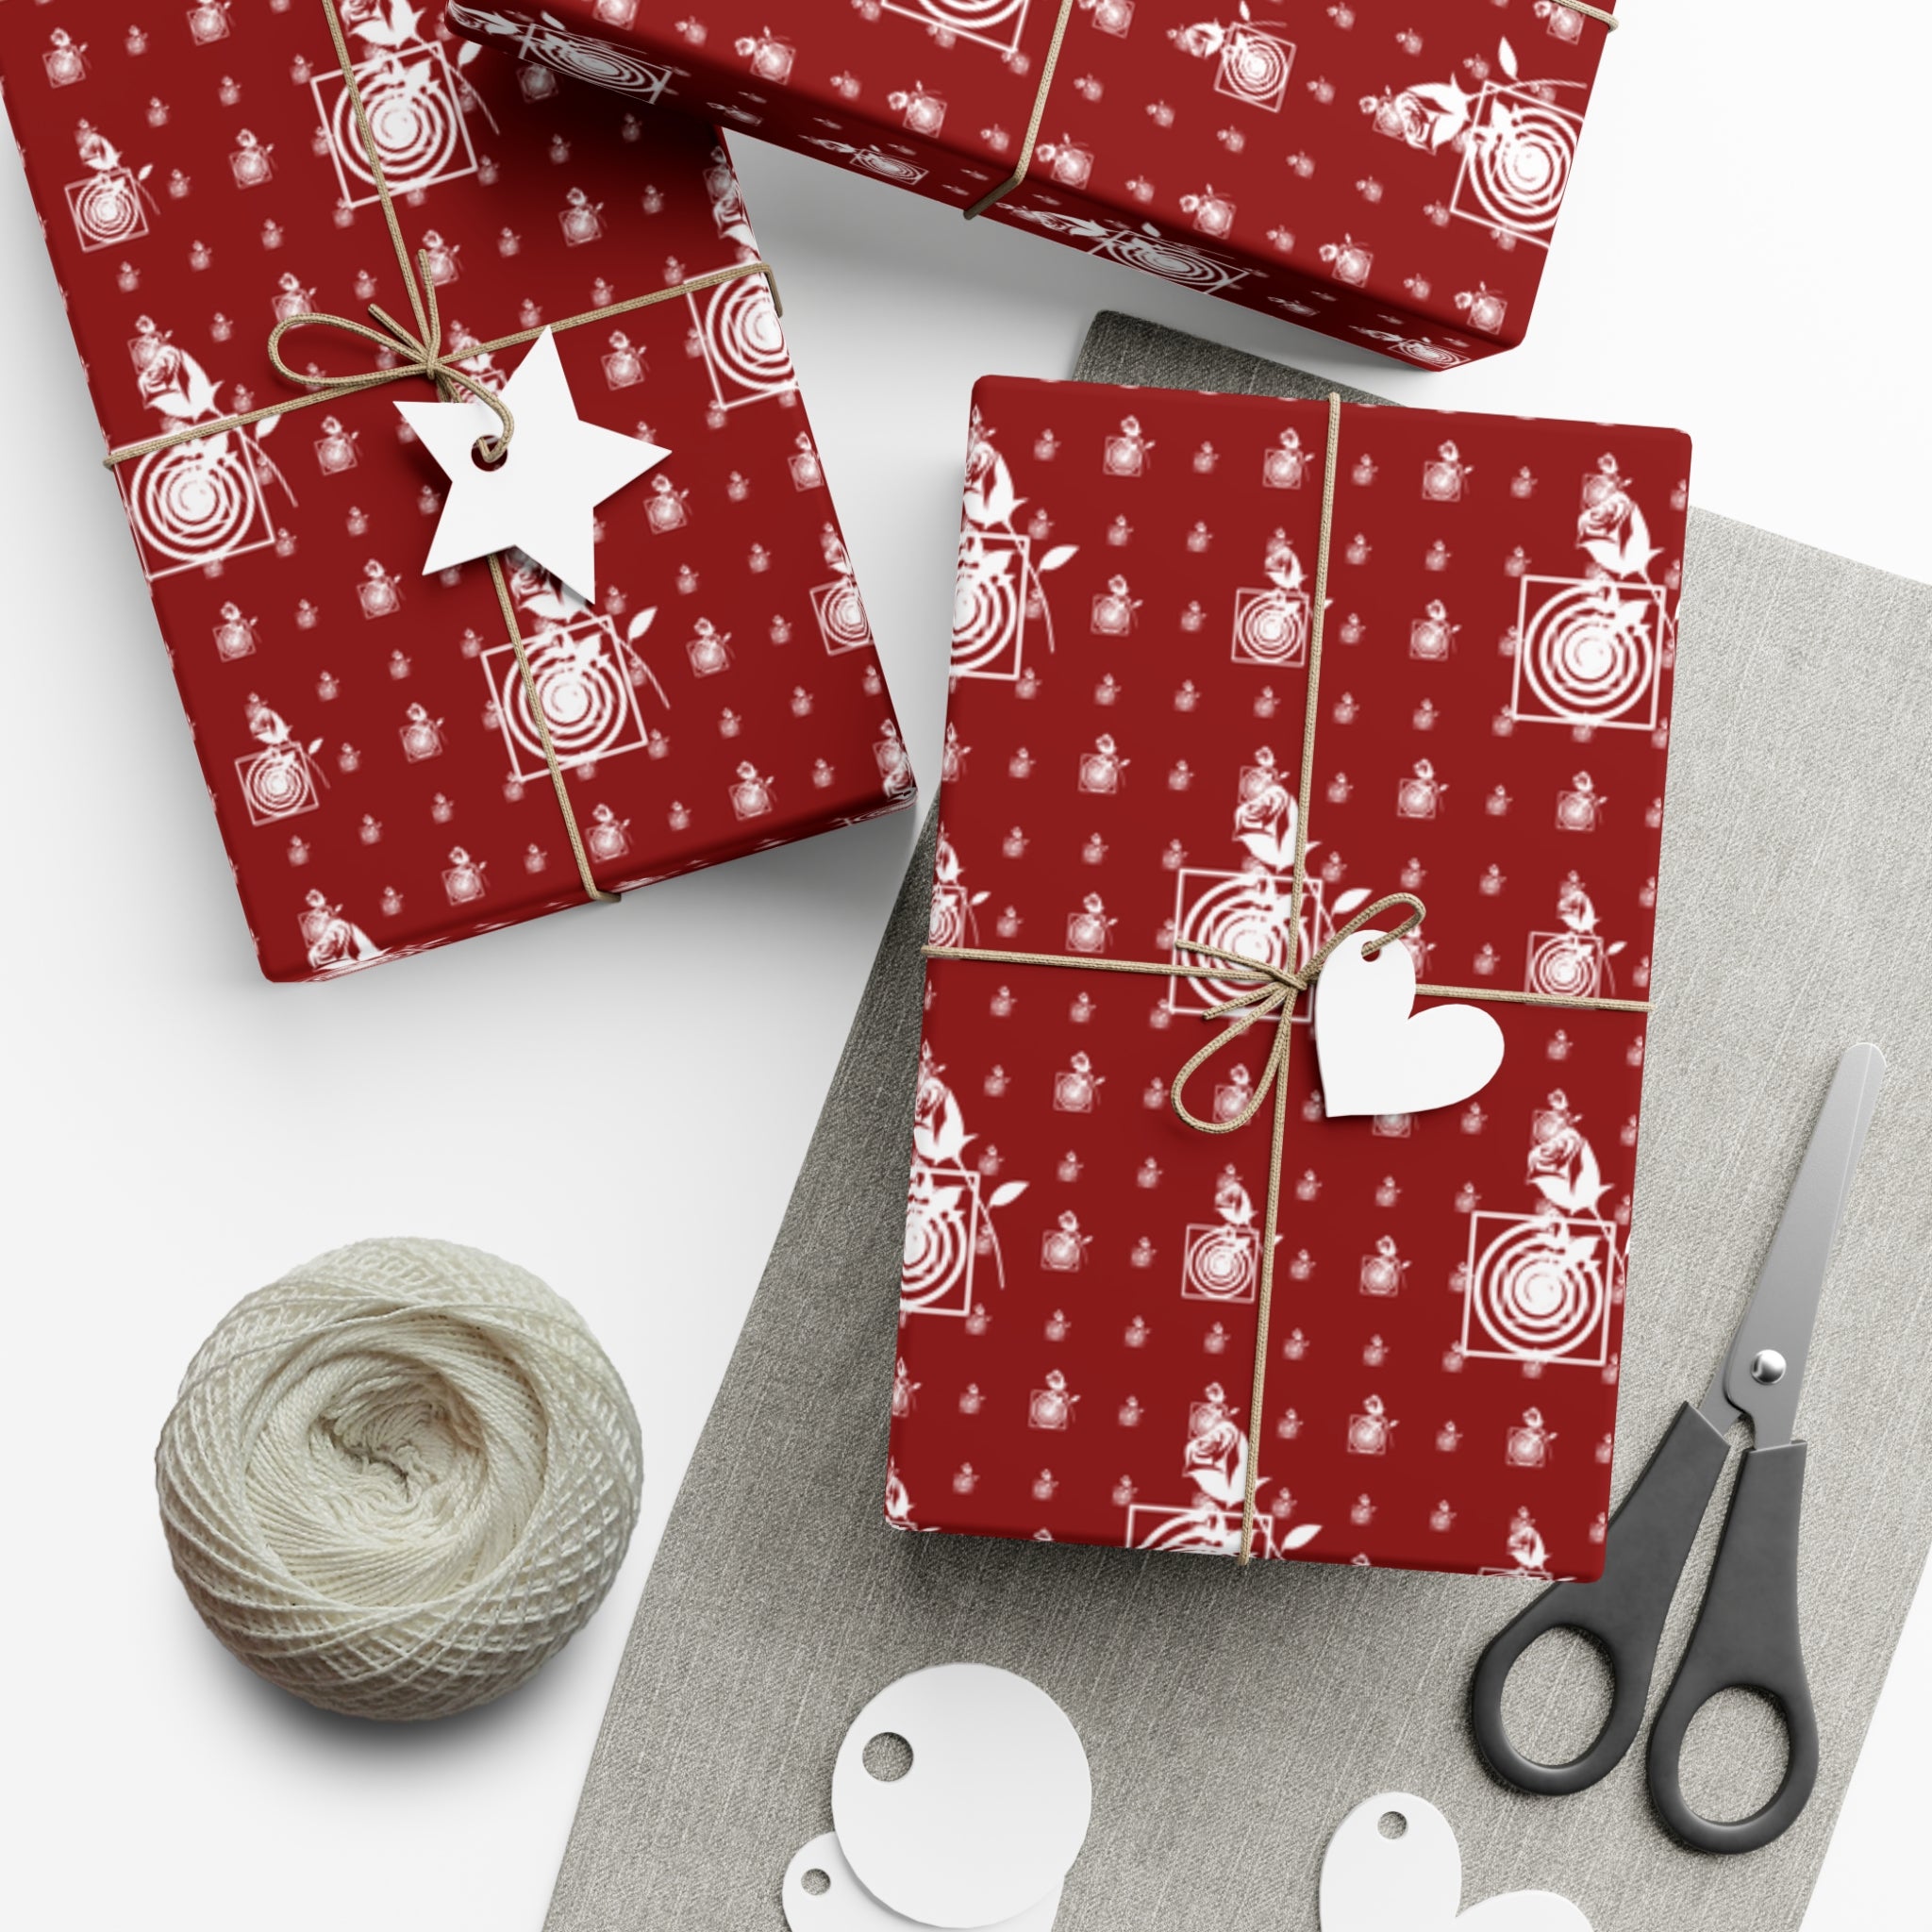 Swirls and Roses on Maroon Gift Wrapping Paper - Shell Design Boutique